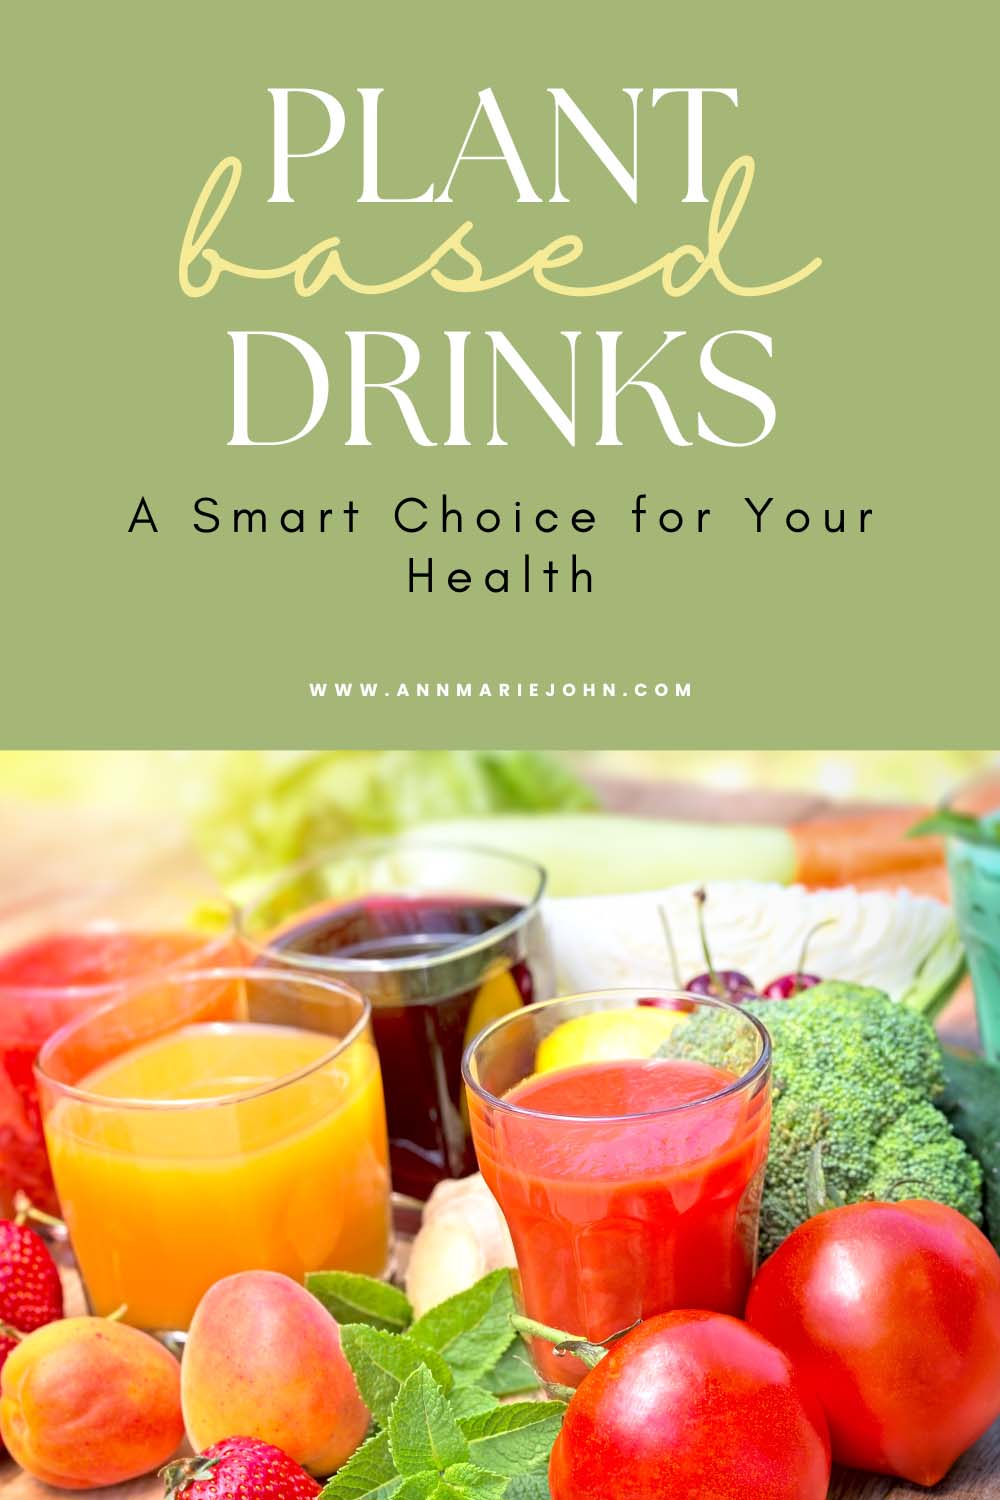 Plant-Based Drinks: A Smart Choice for Your Health